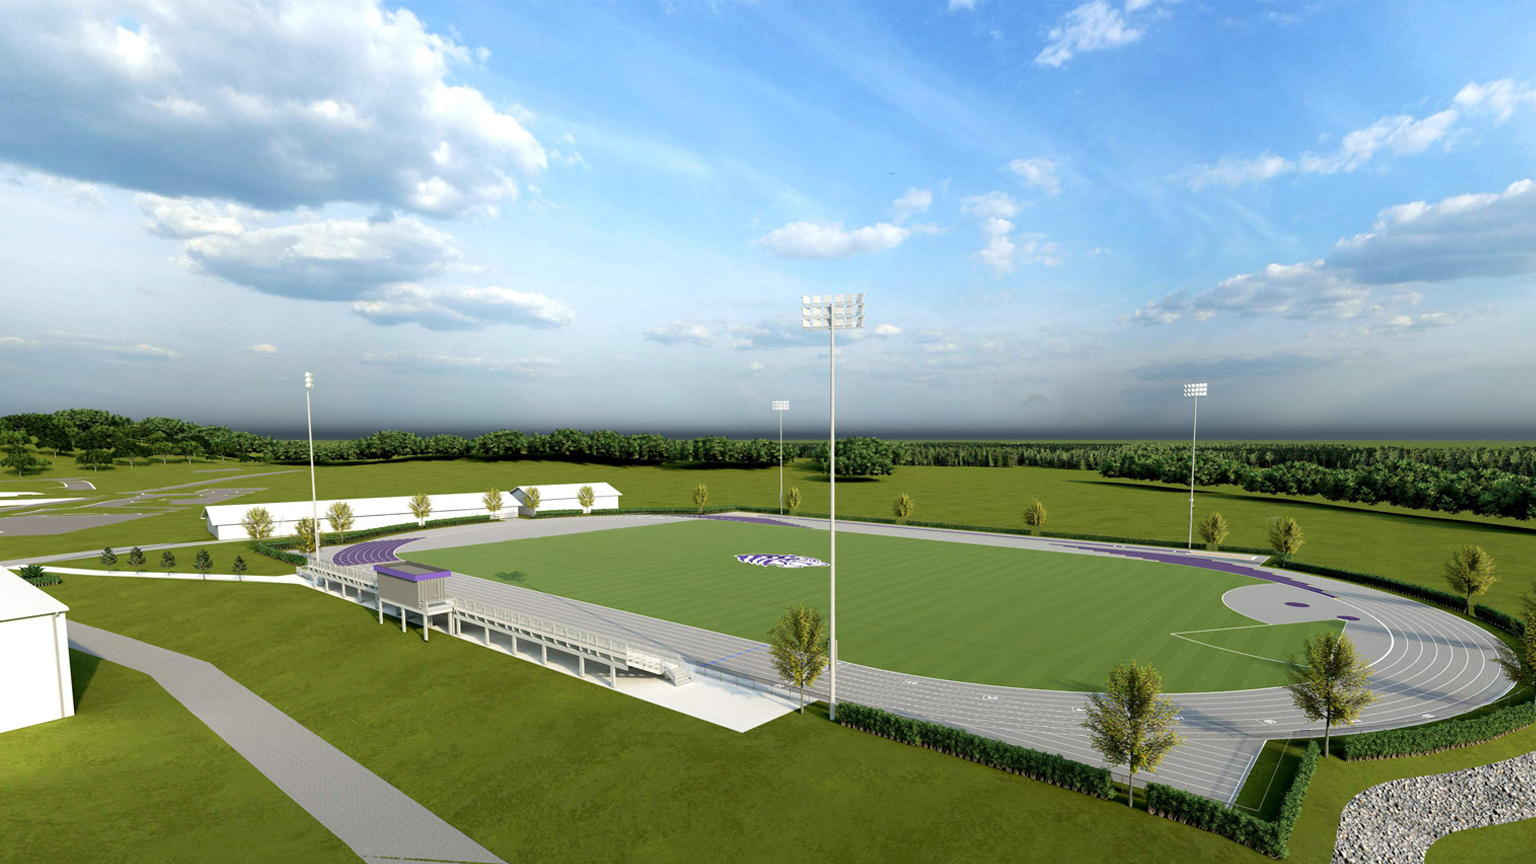 Proposed track & field complex at Ouachita Baptist University